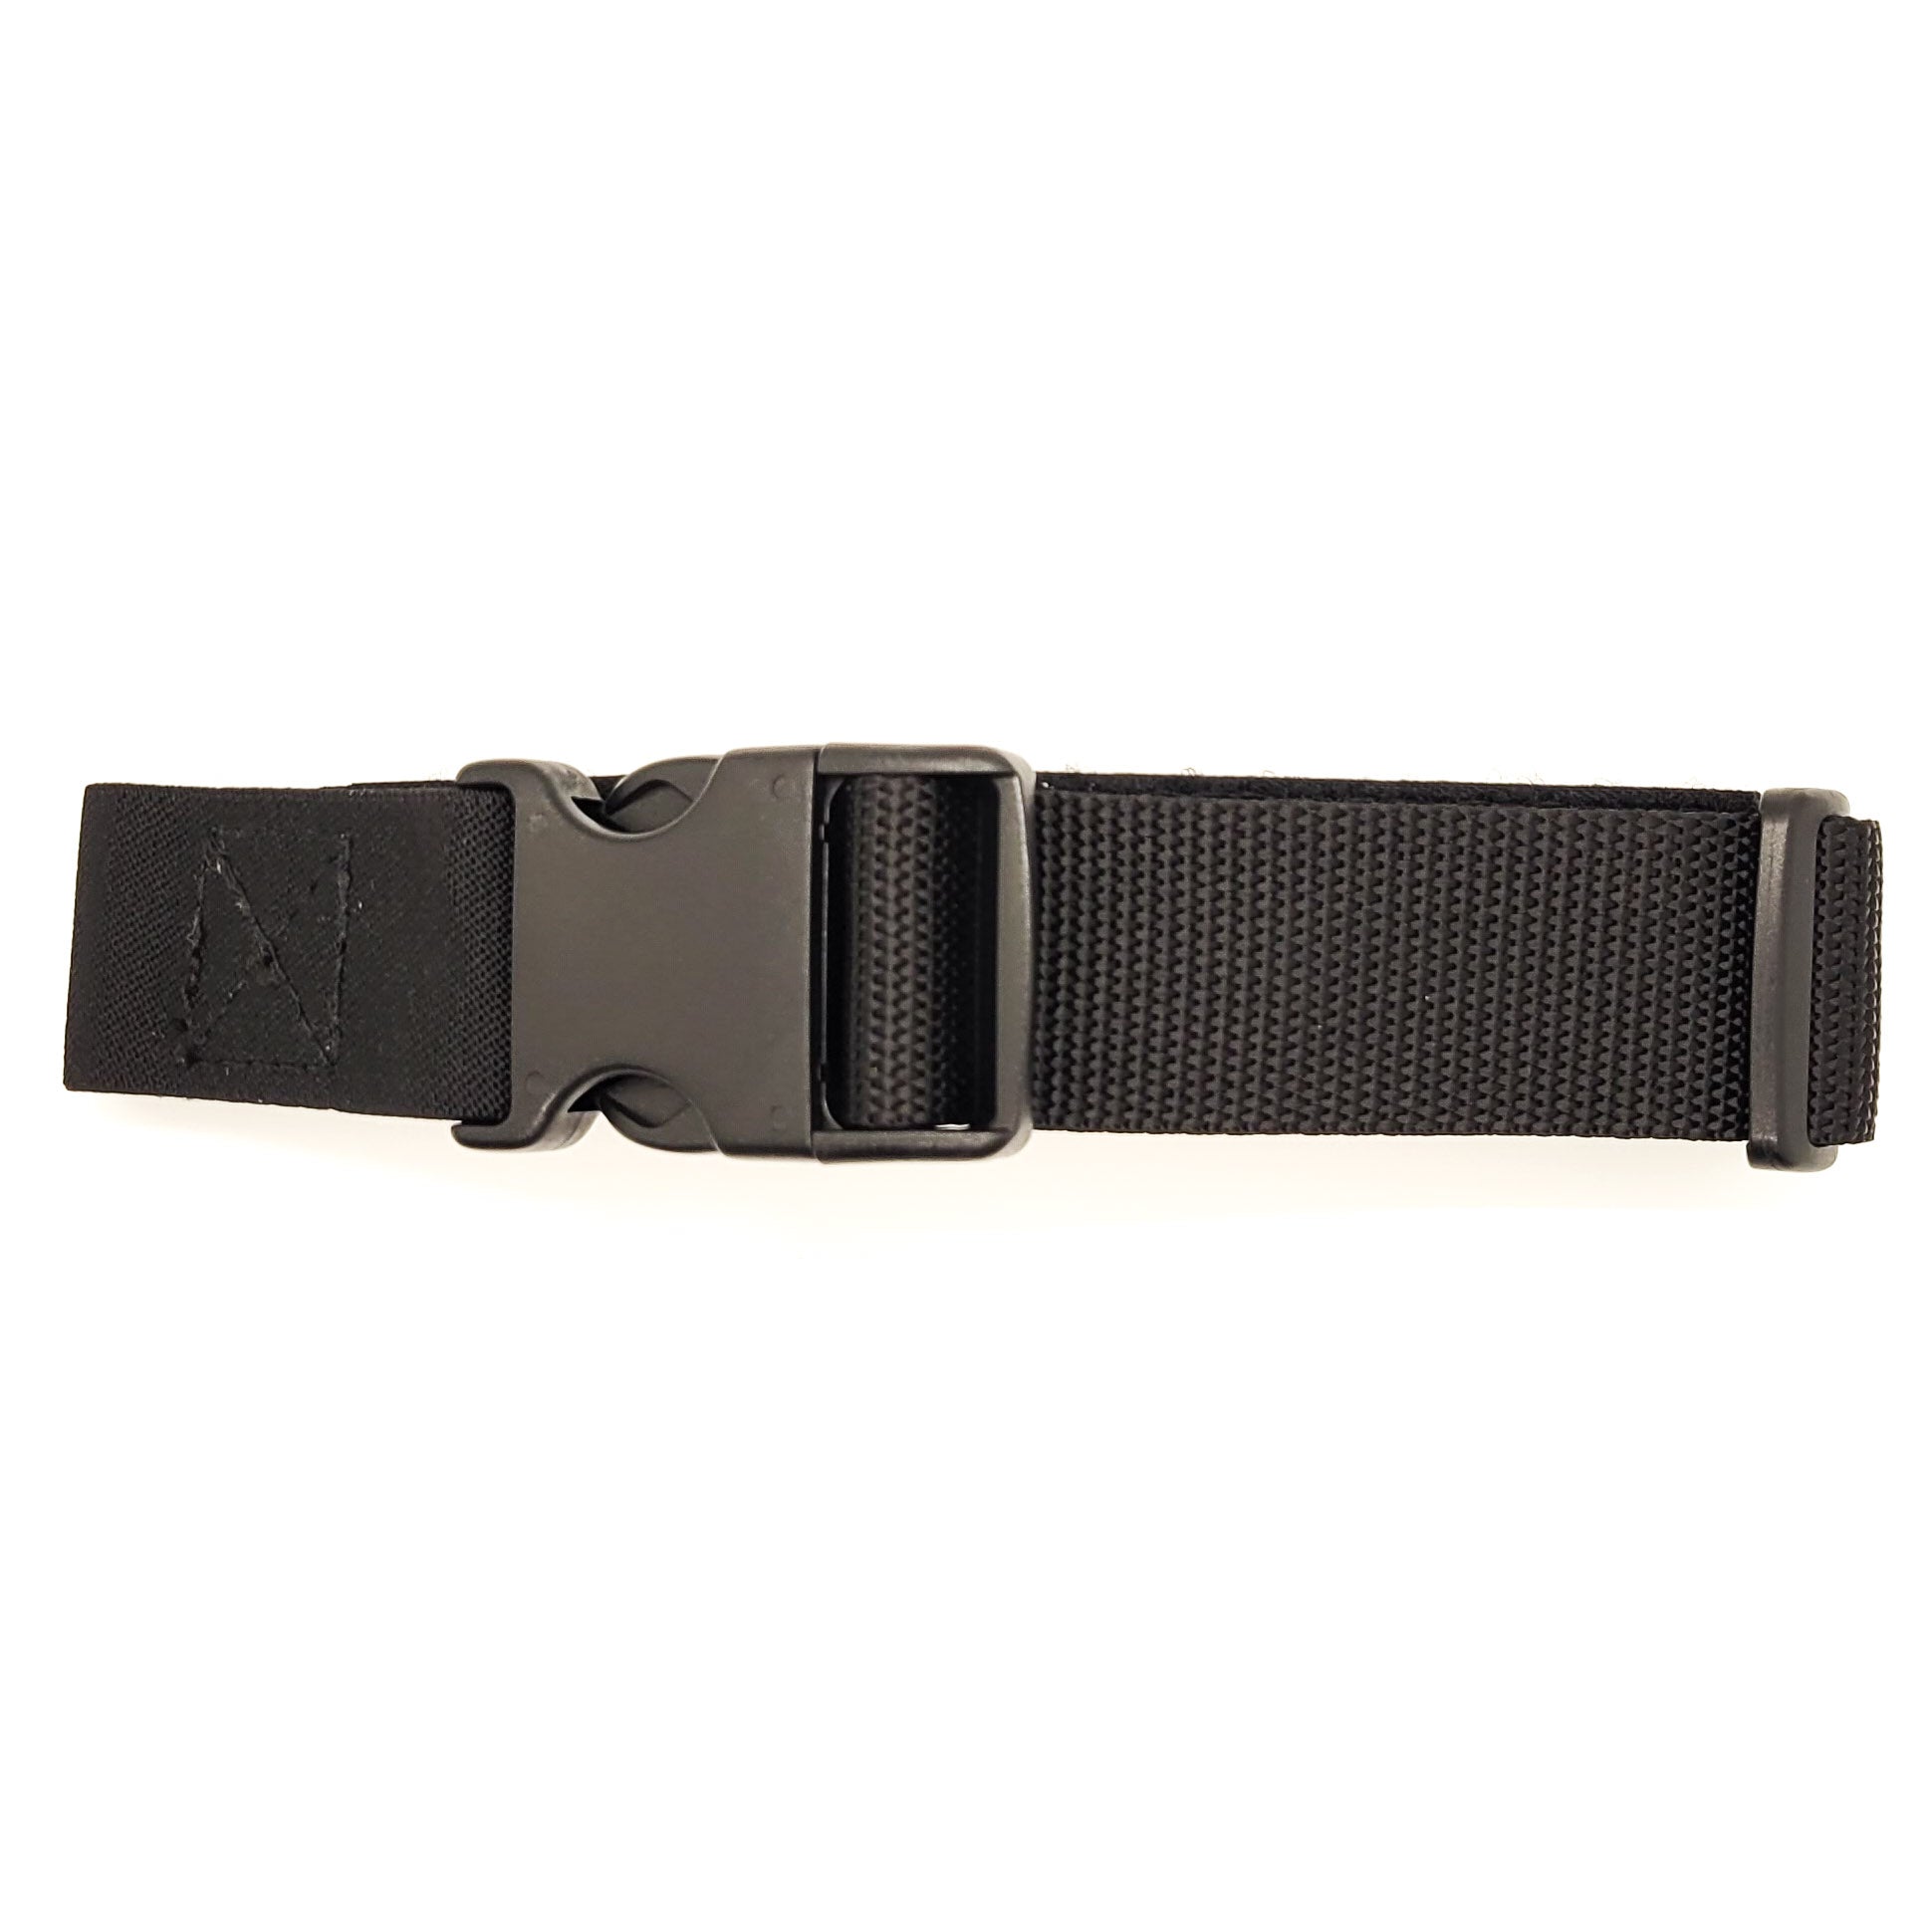 Holster thigh straps help keep a low or mid-ride holster from pulling away from the body when drawing your pistol. Our strap works well with the Safariland UBL and Blade-Tech Duty Drop holster attachments. Proudly made in the USA and also proudly made in Indiana. Our 1 1/2" Strap is made of a Polypropylene webbing 